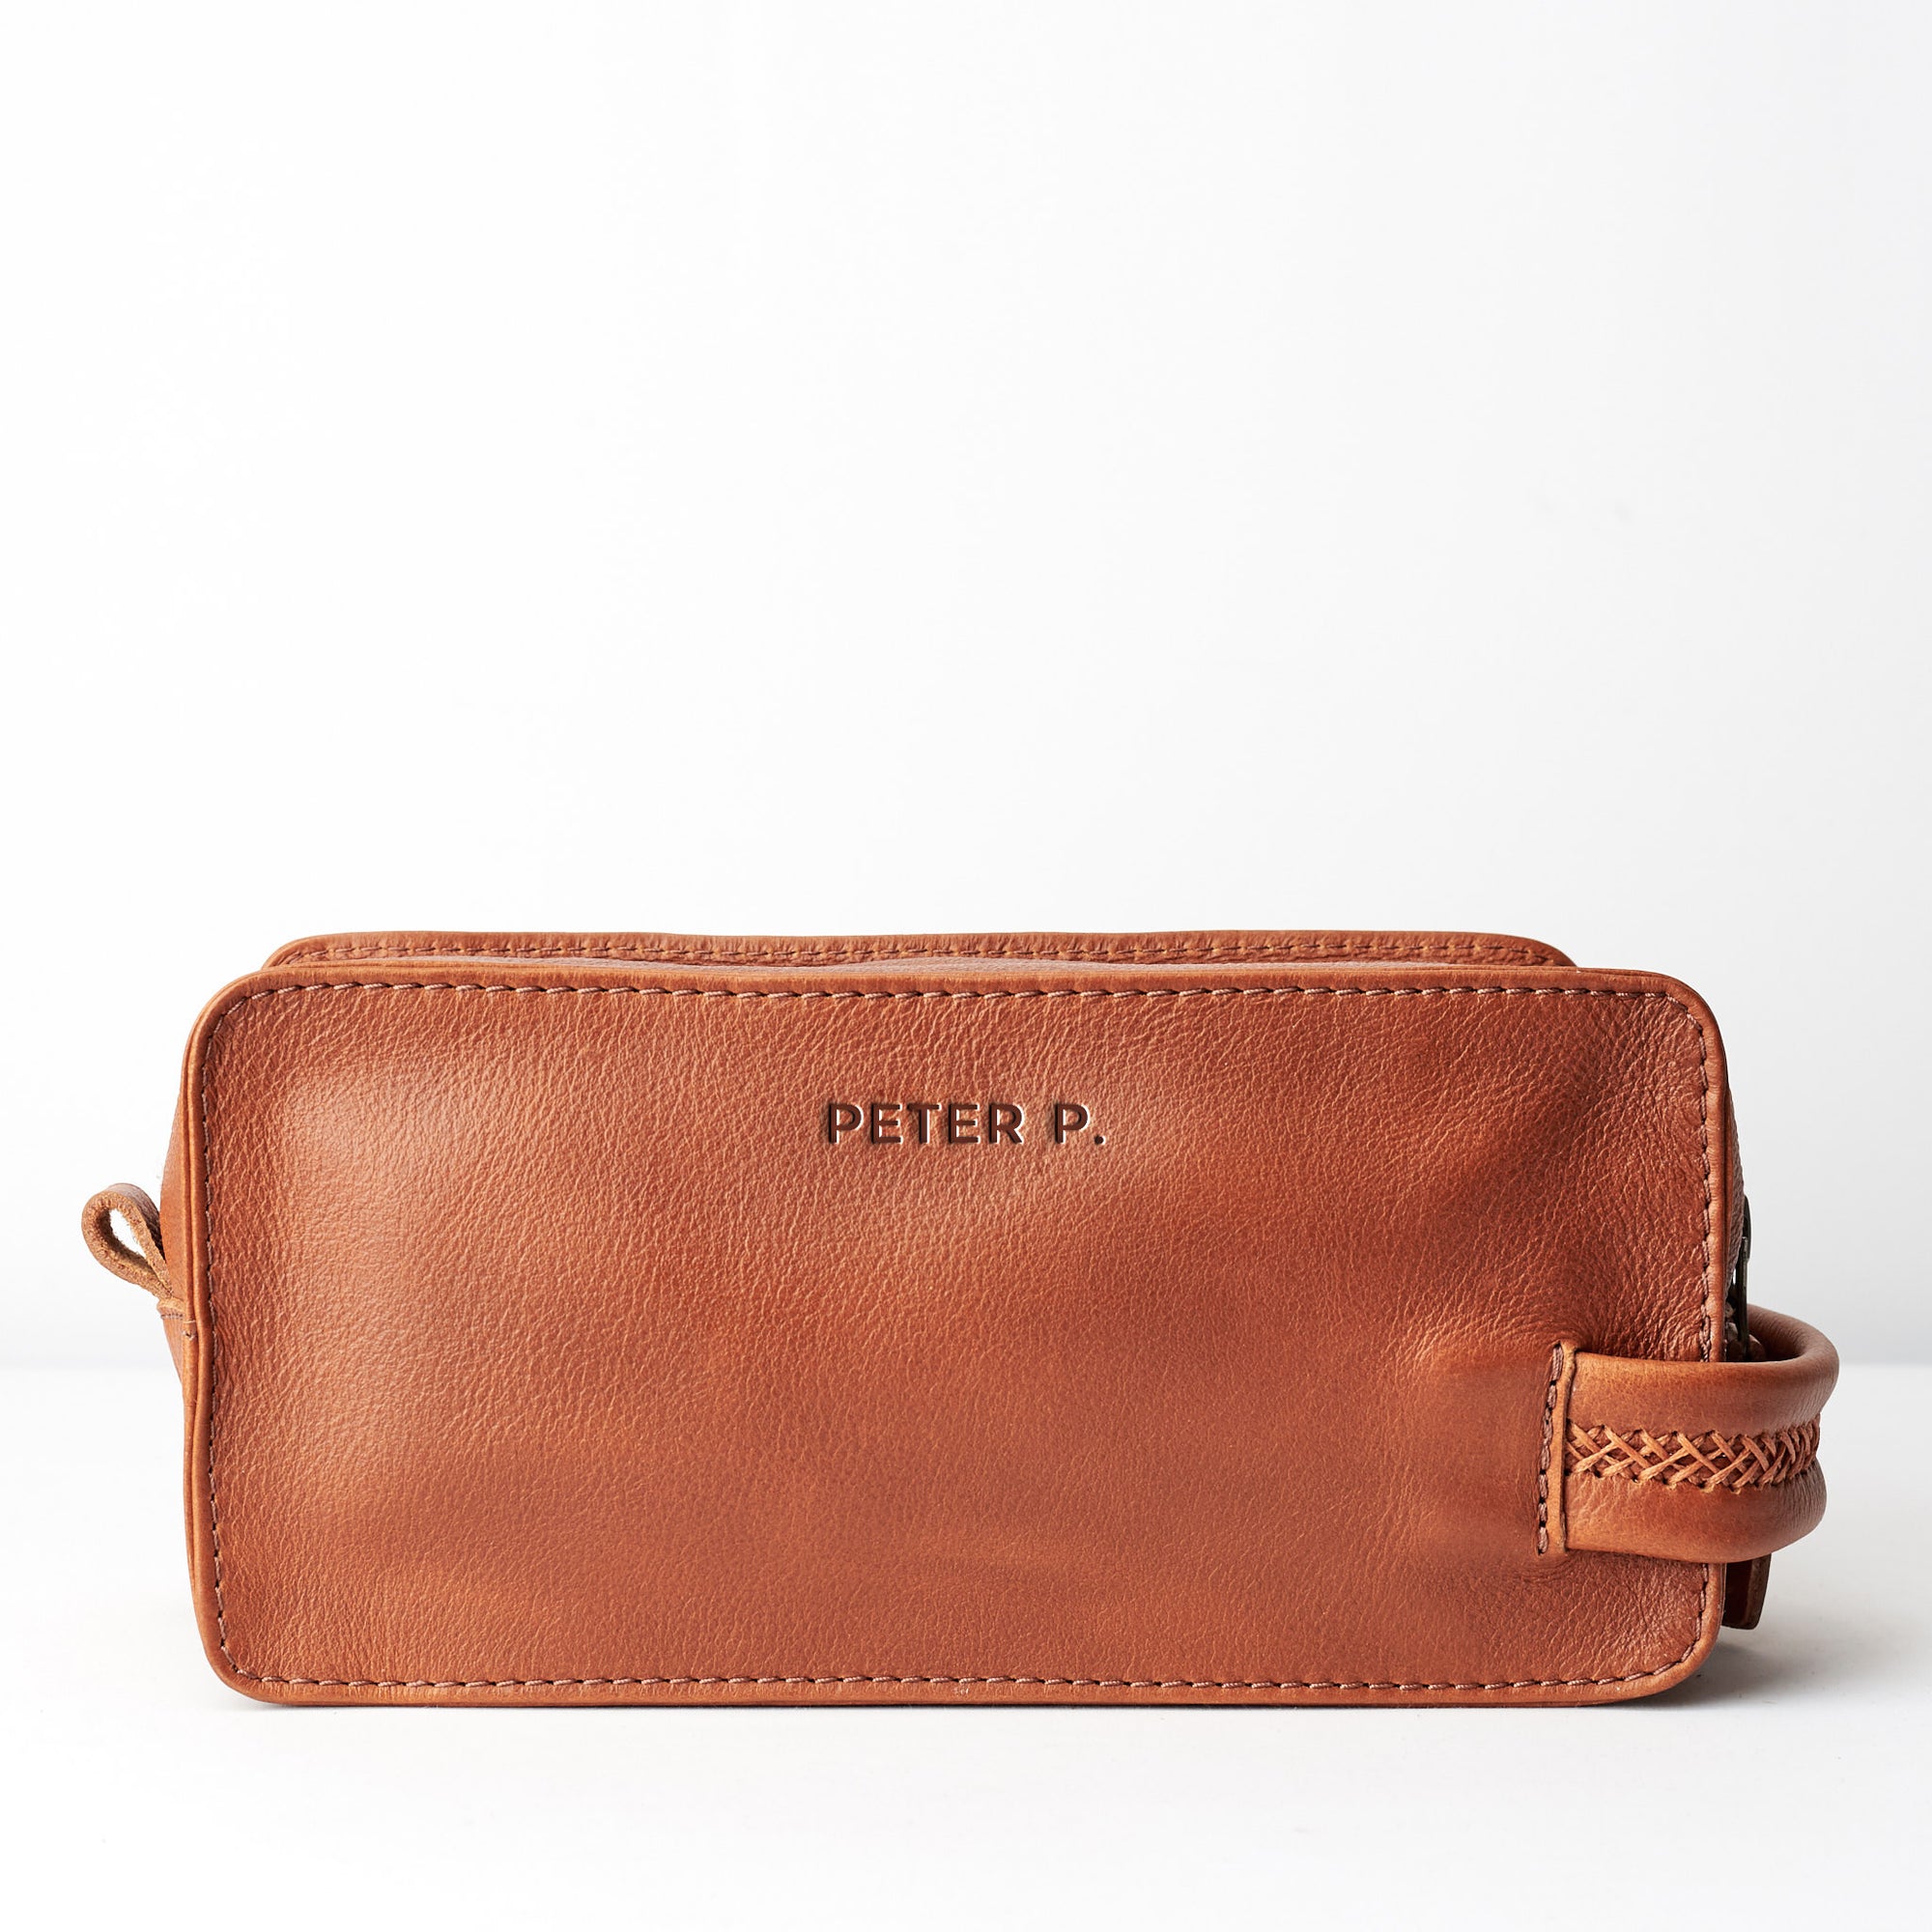 Engraving for toiletry bag tan by Capra Leather